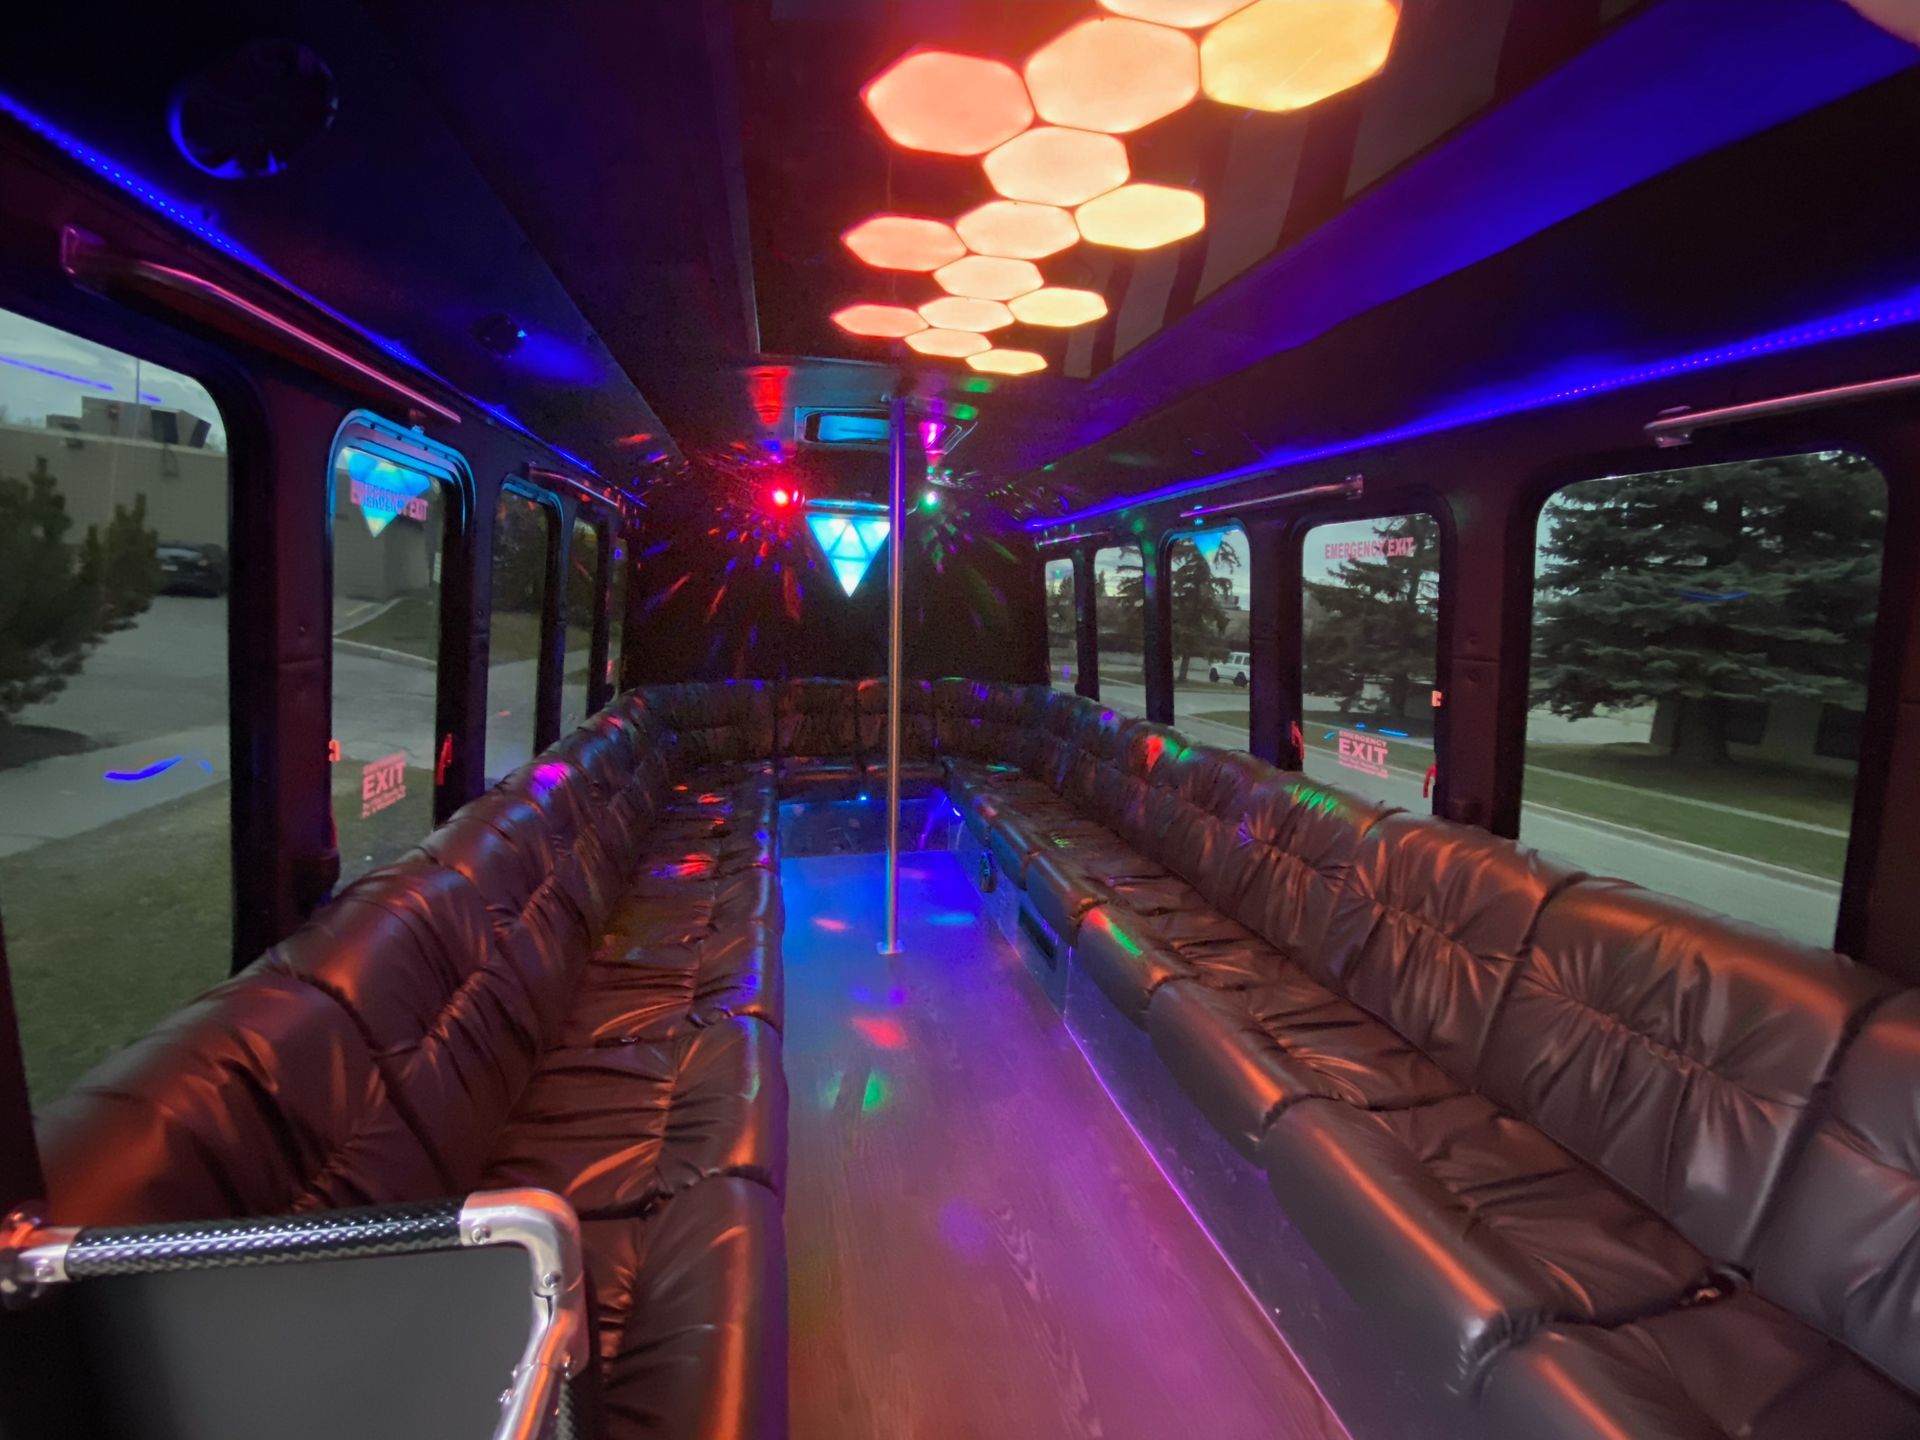 Ford Transit Battisti Limo To Go 12 Passenger black party bus interior rear facing view with wraparound seating and LED lighting